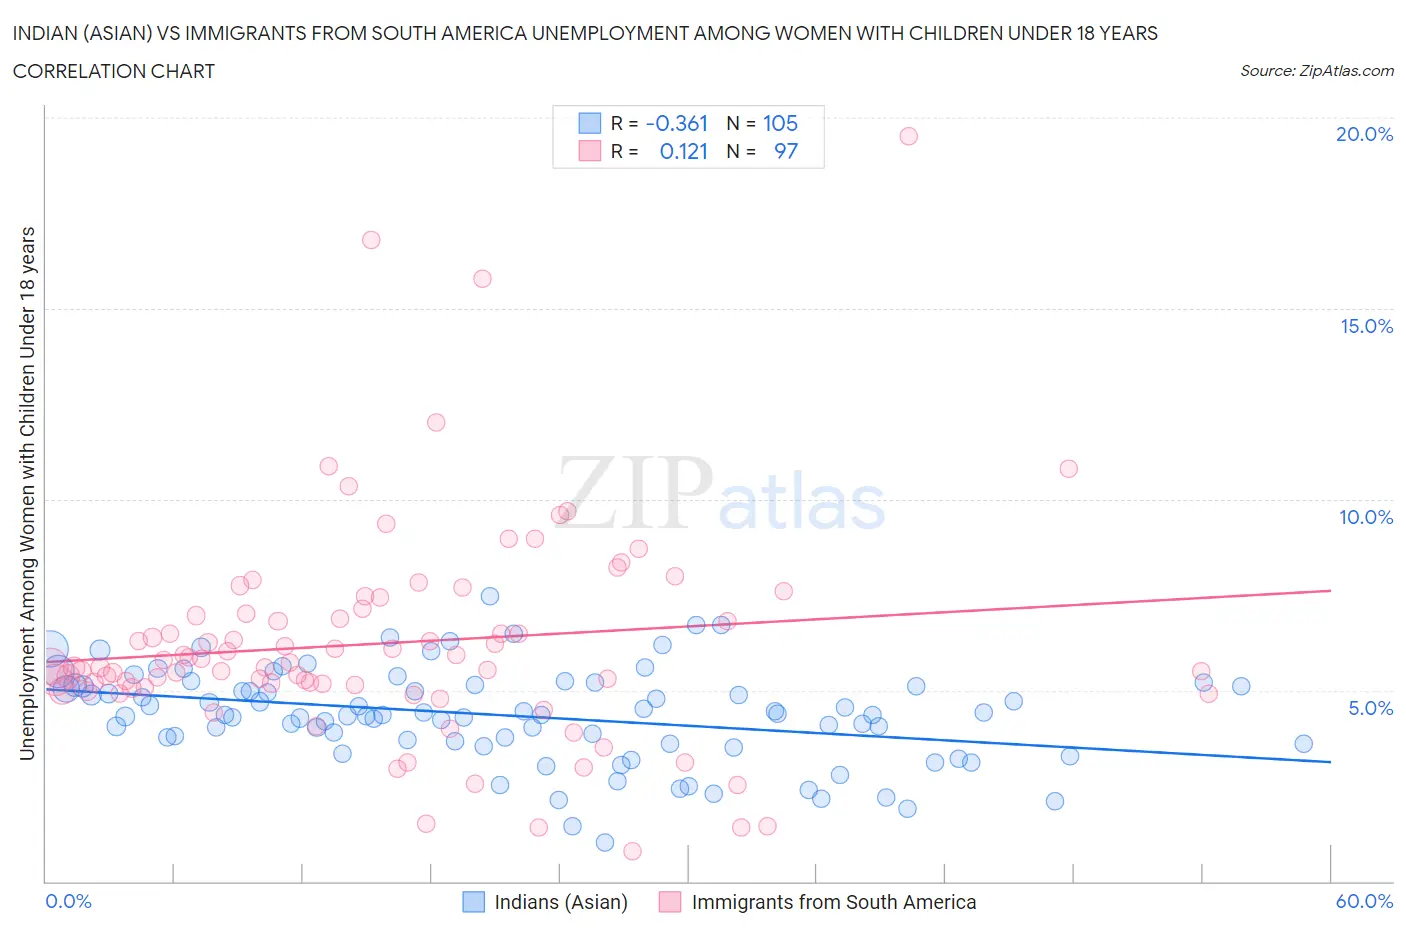 Indian (Asian) vs Immigrants from South America Unemployment Among Women with Children Under 18 years